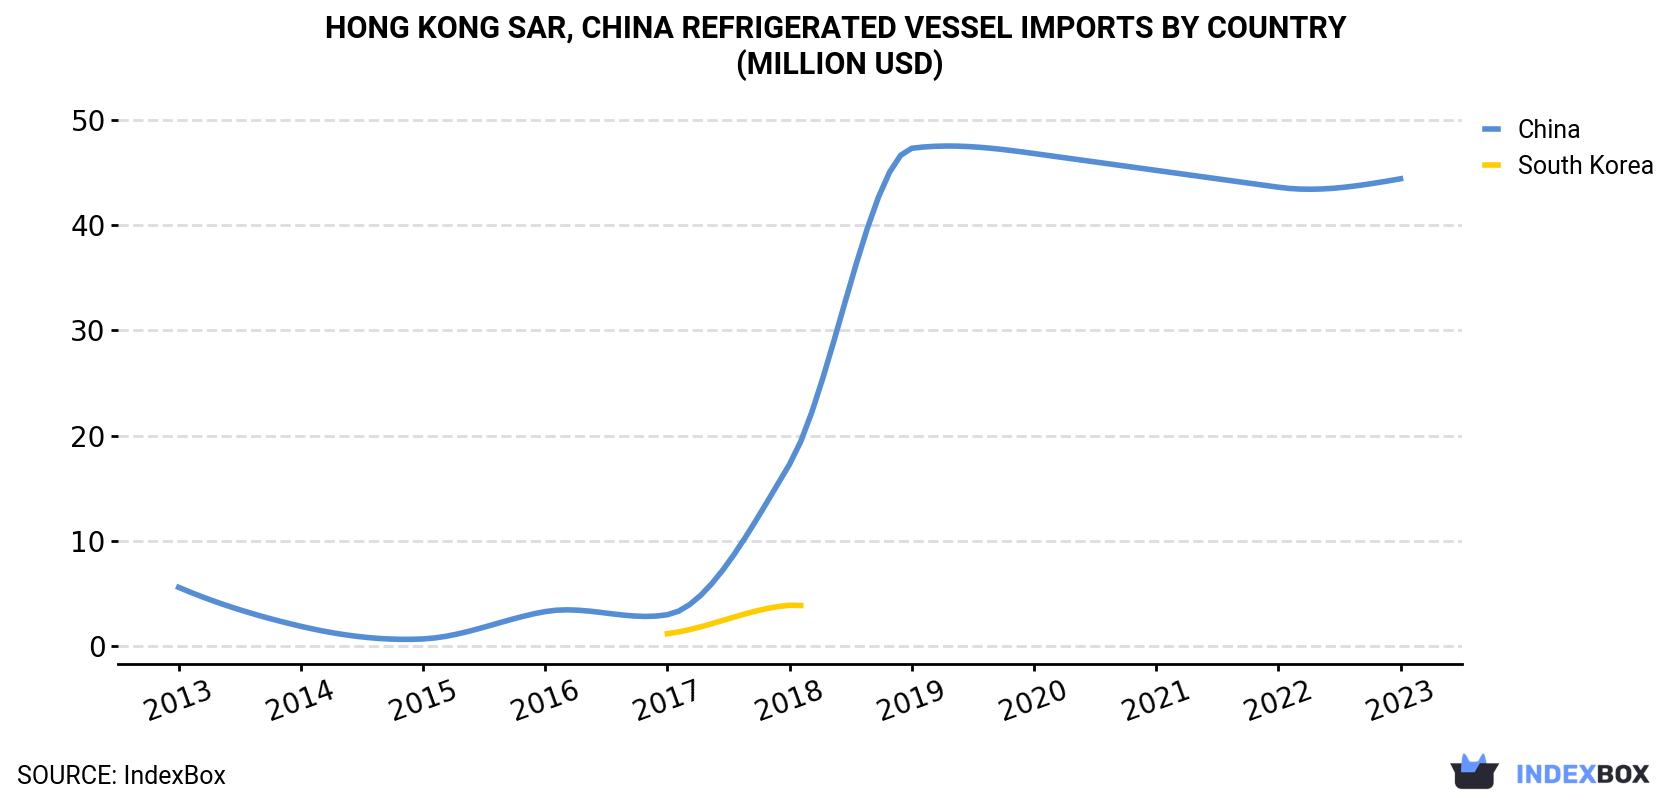 Hong Kong Refrigerated Vessel Imports By Country (Million USD)